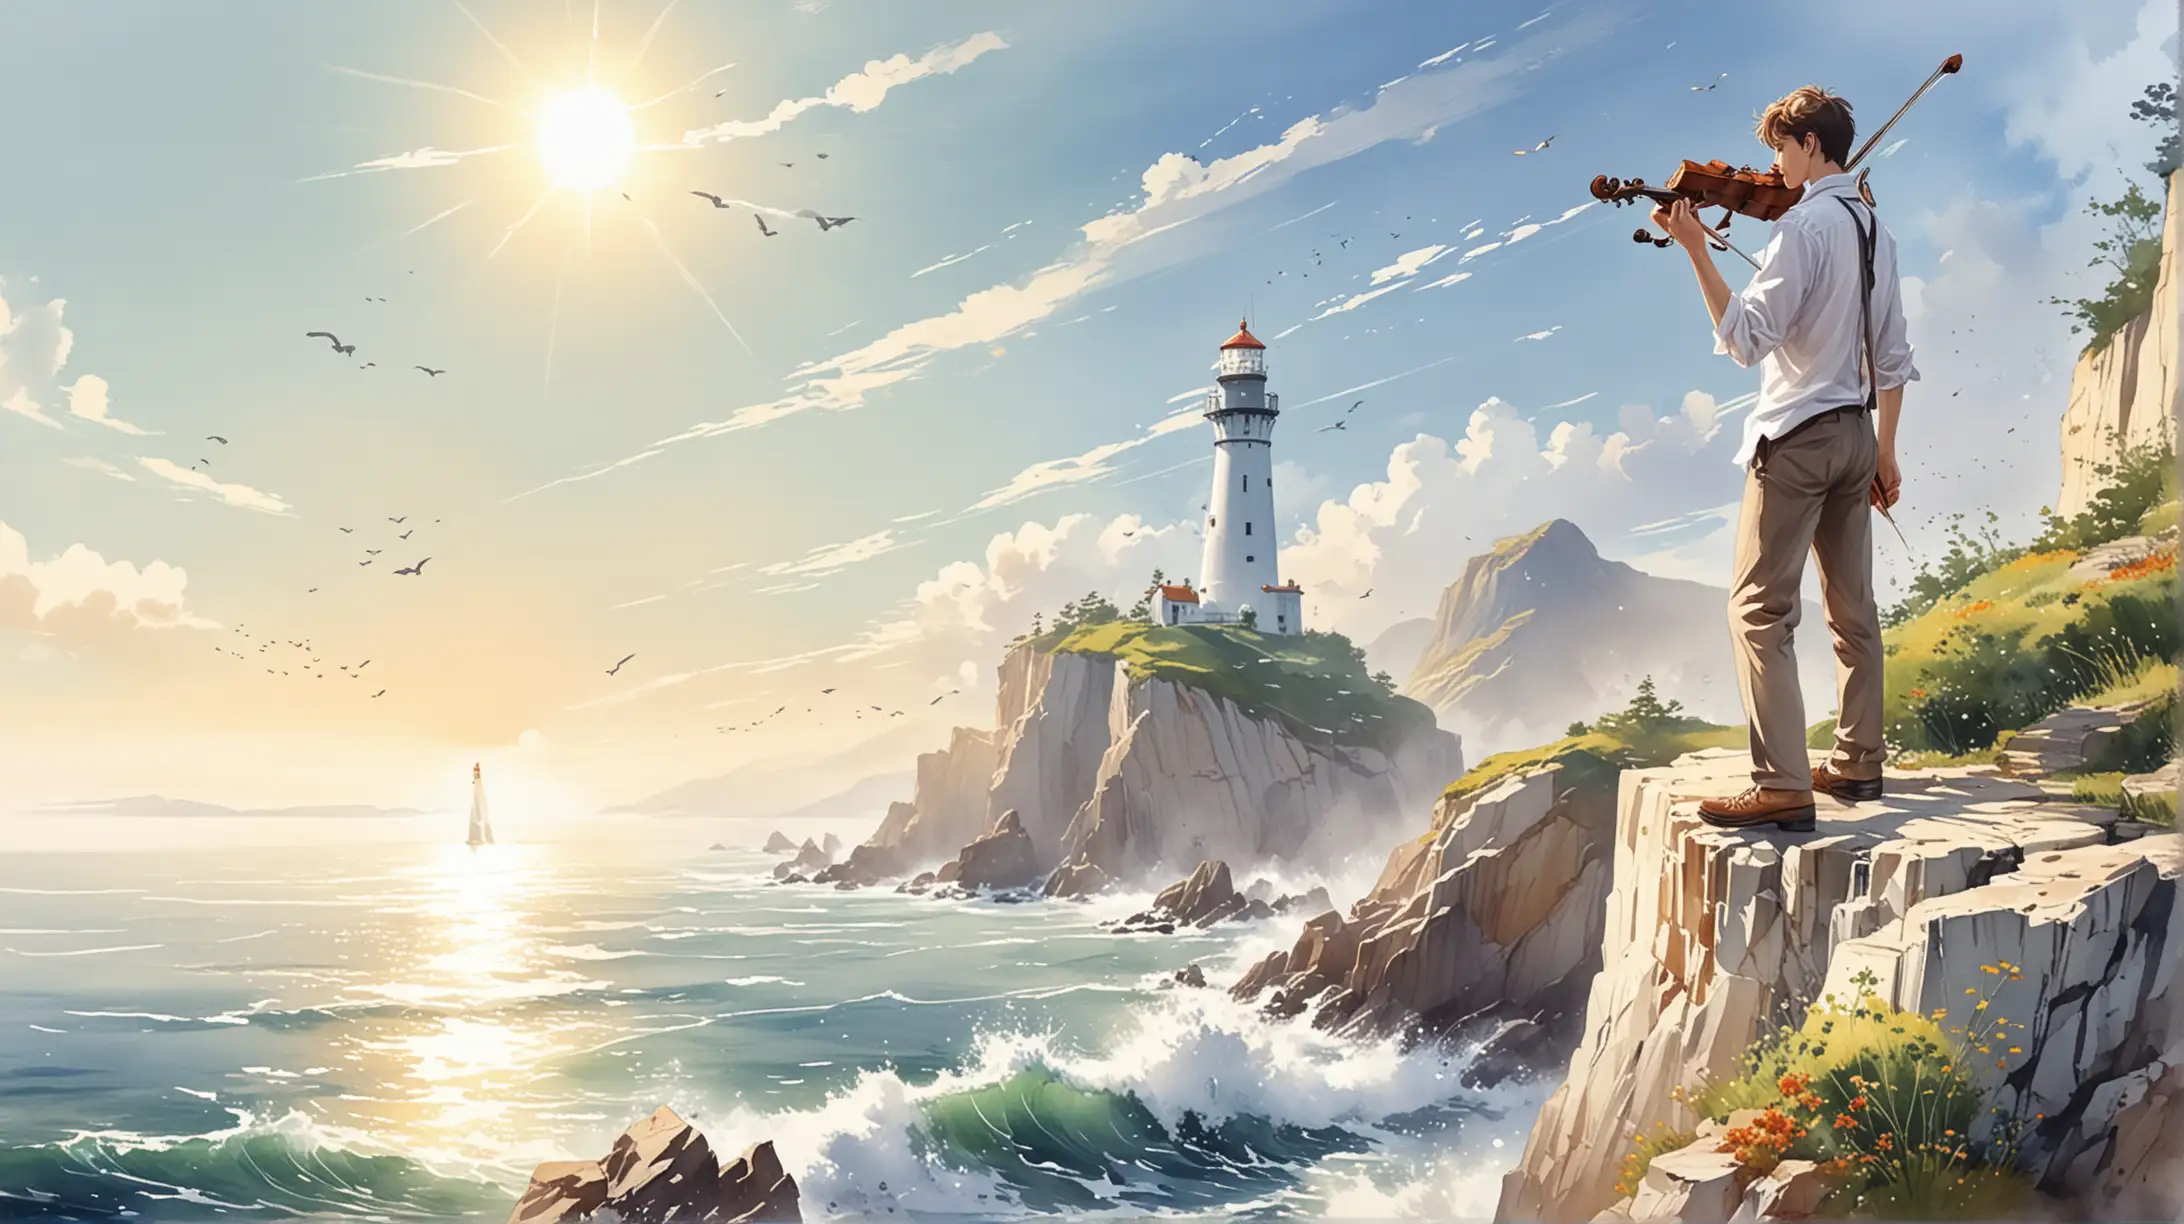 Cliffside Violinist Inspirational Anime Scene with Lighthouse View